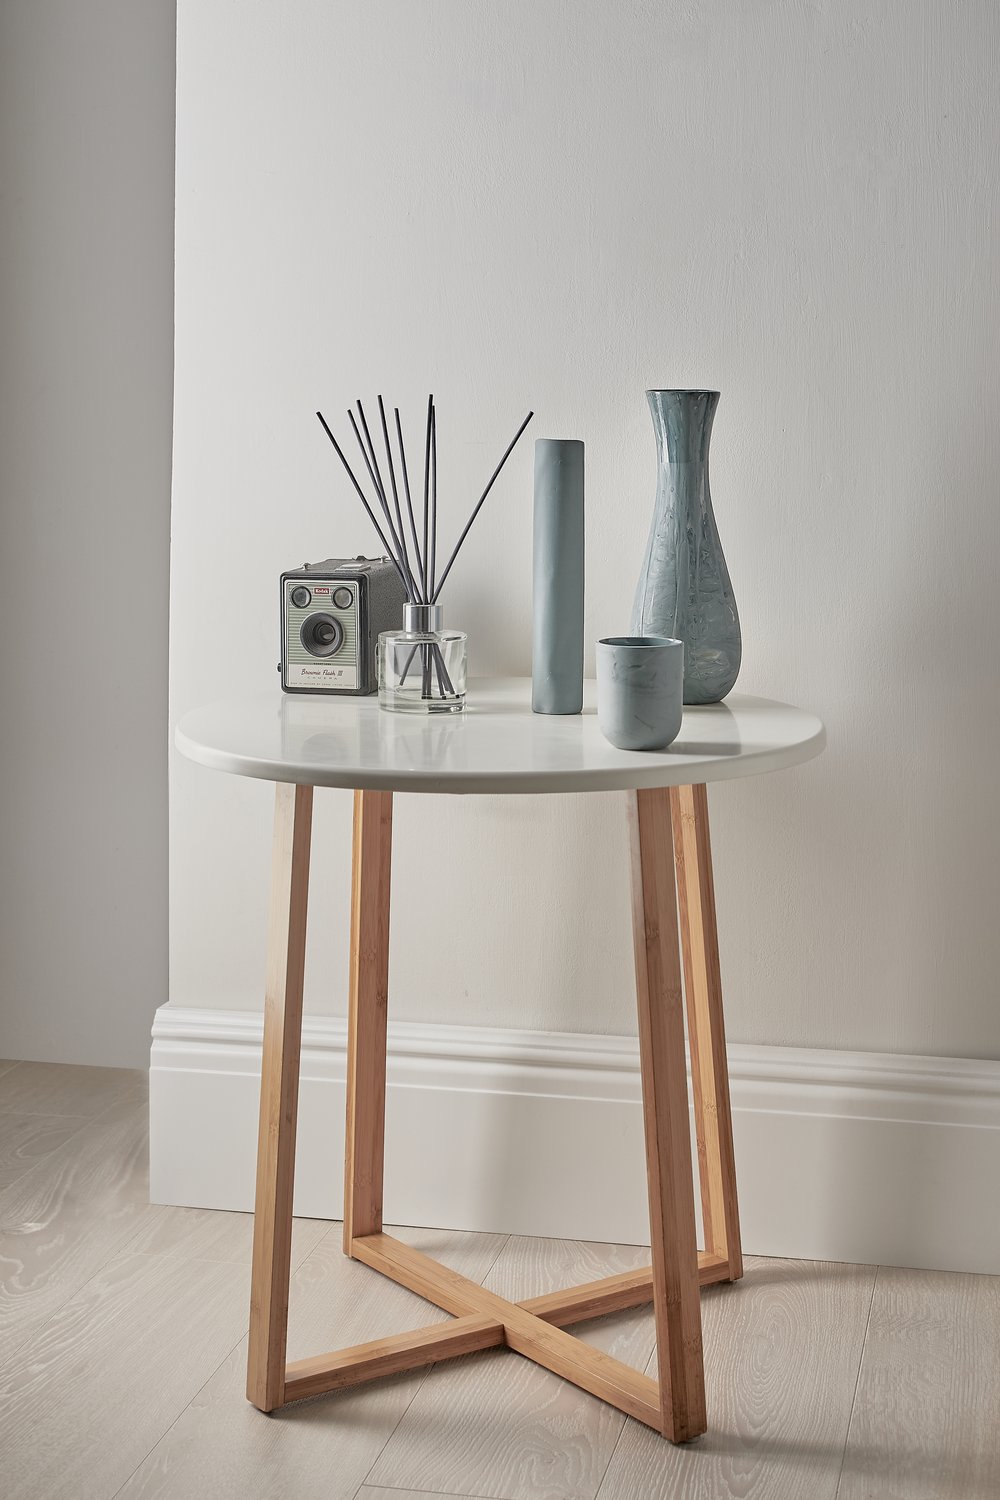  Contemporary ceramic design photographed in-situ within product photographer’s studio on habitat circular side table 